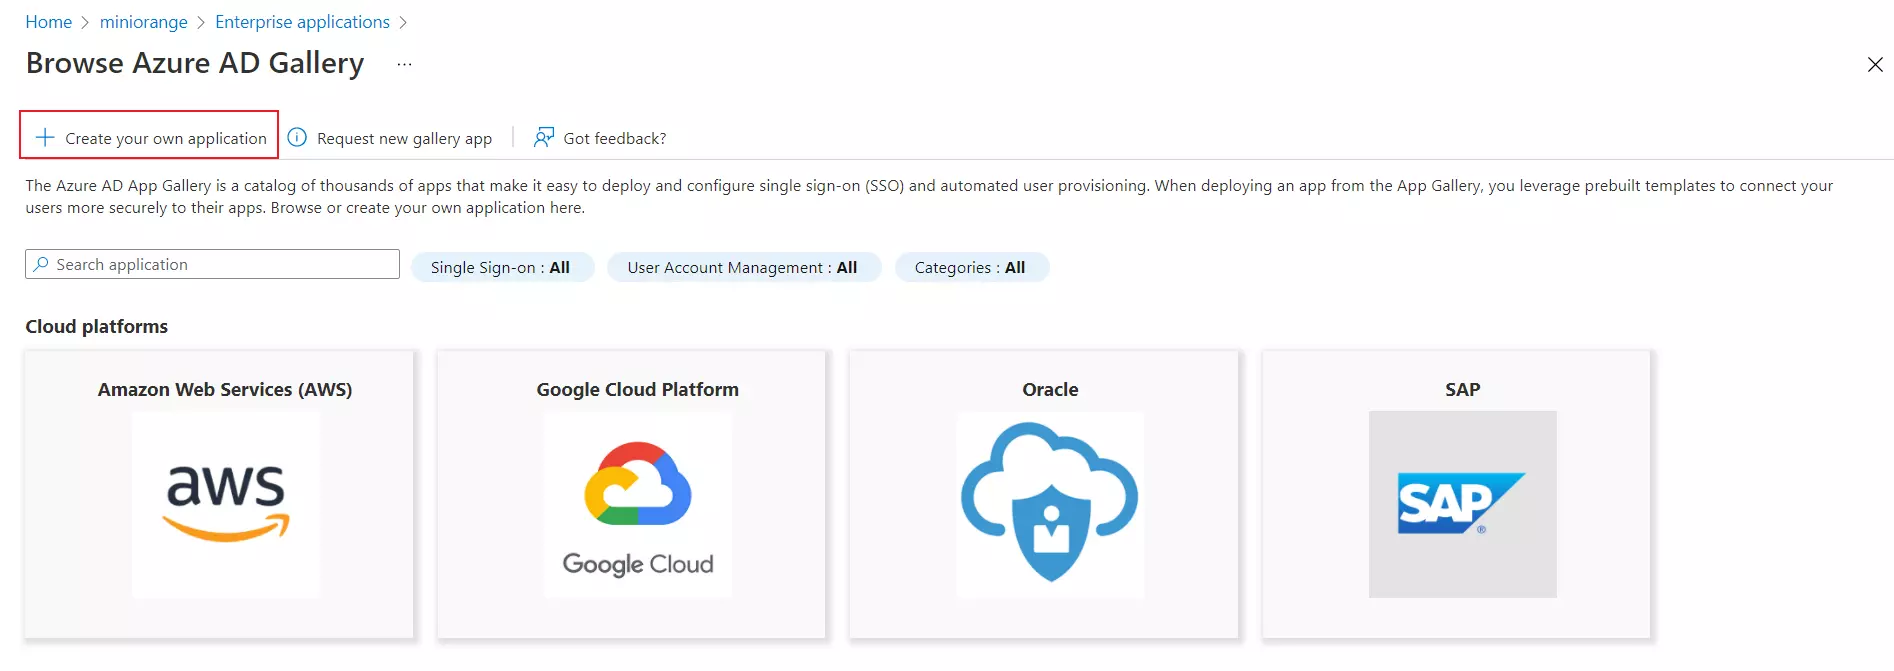 User provisioning with Azure AD of SCIM Standard Applicaiton Name SCIM_User_provisioning